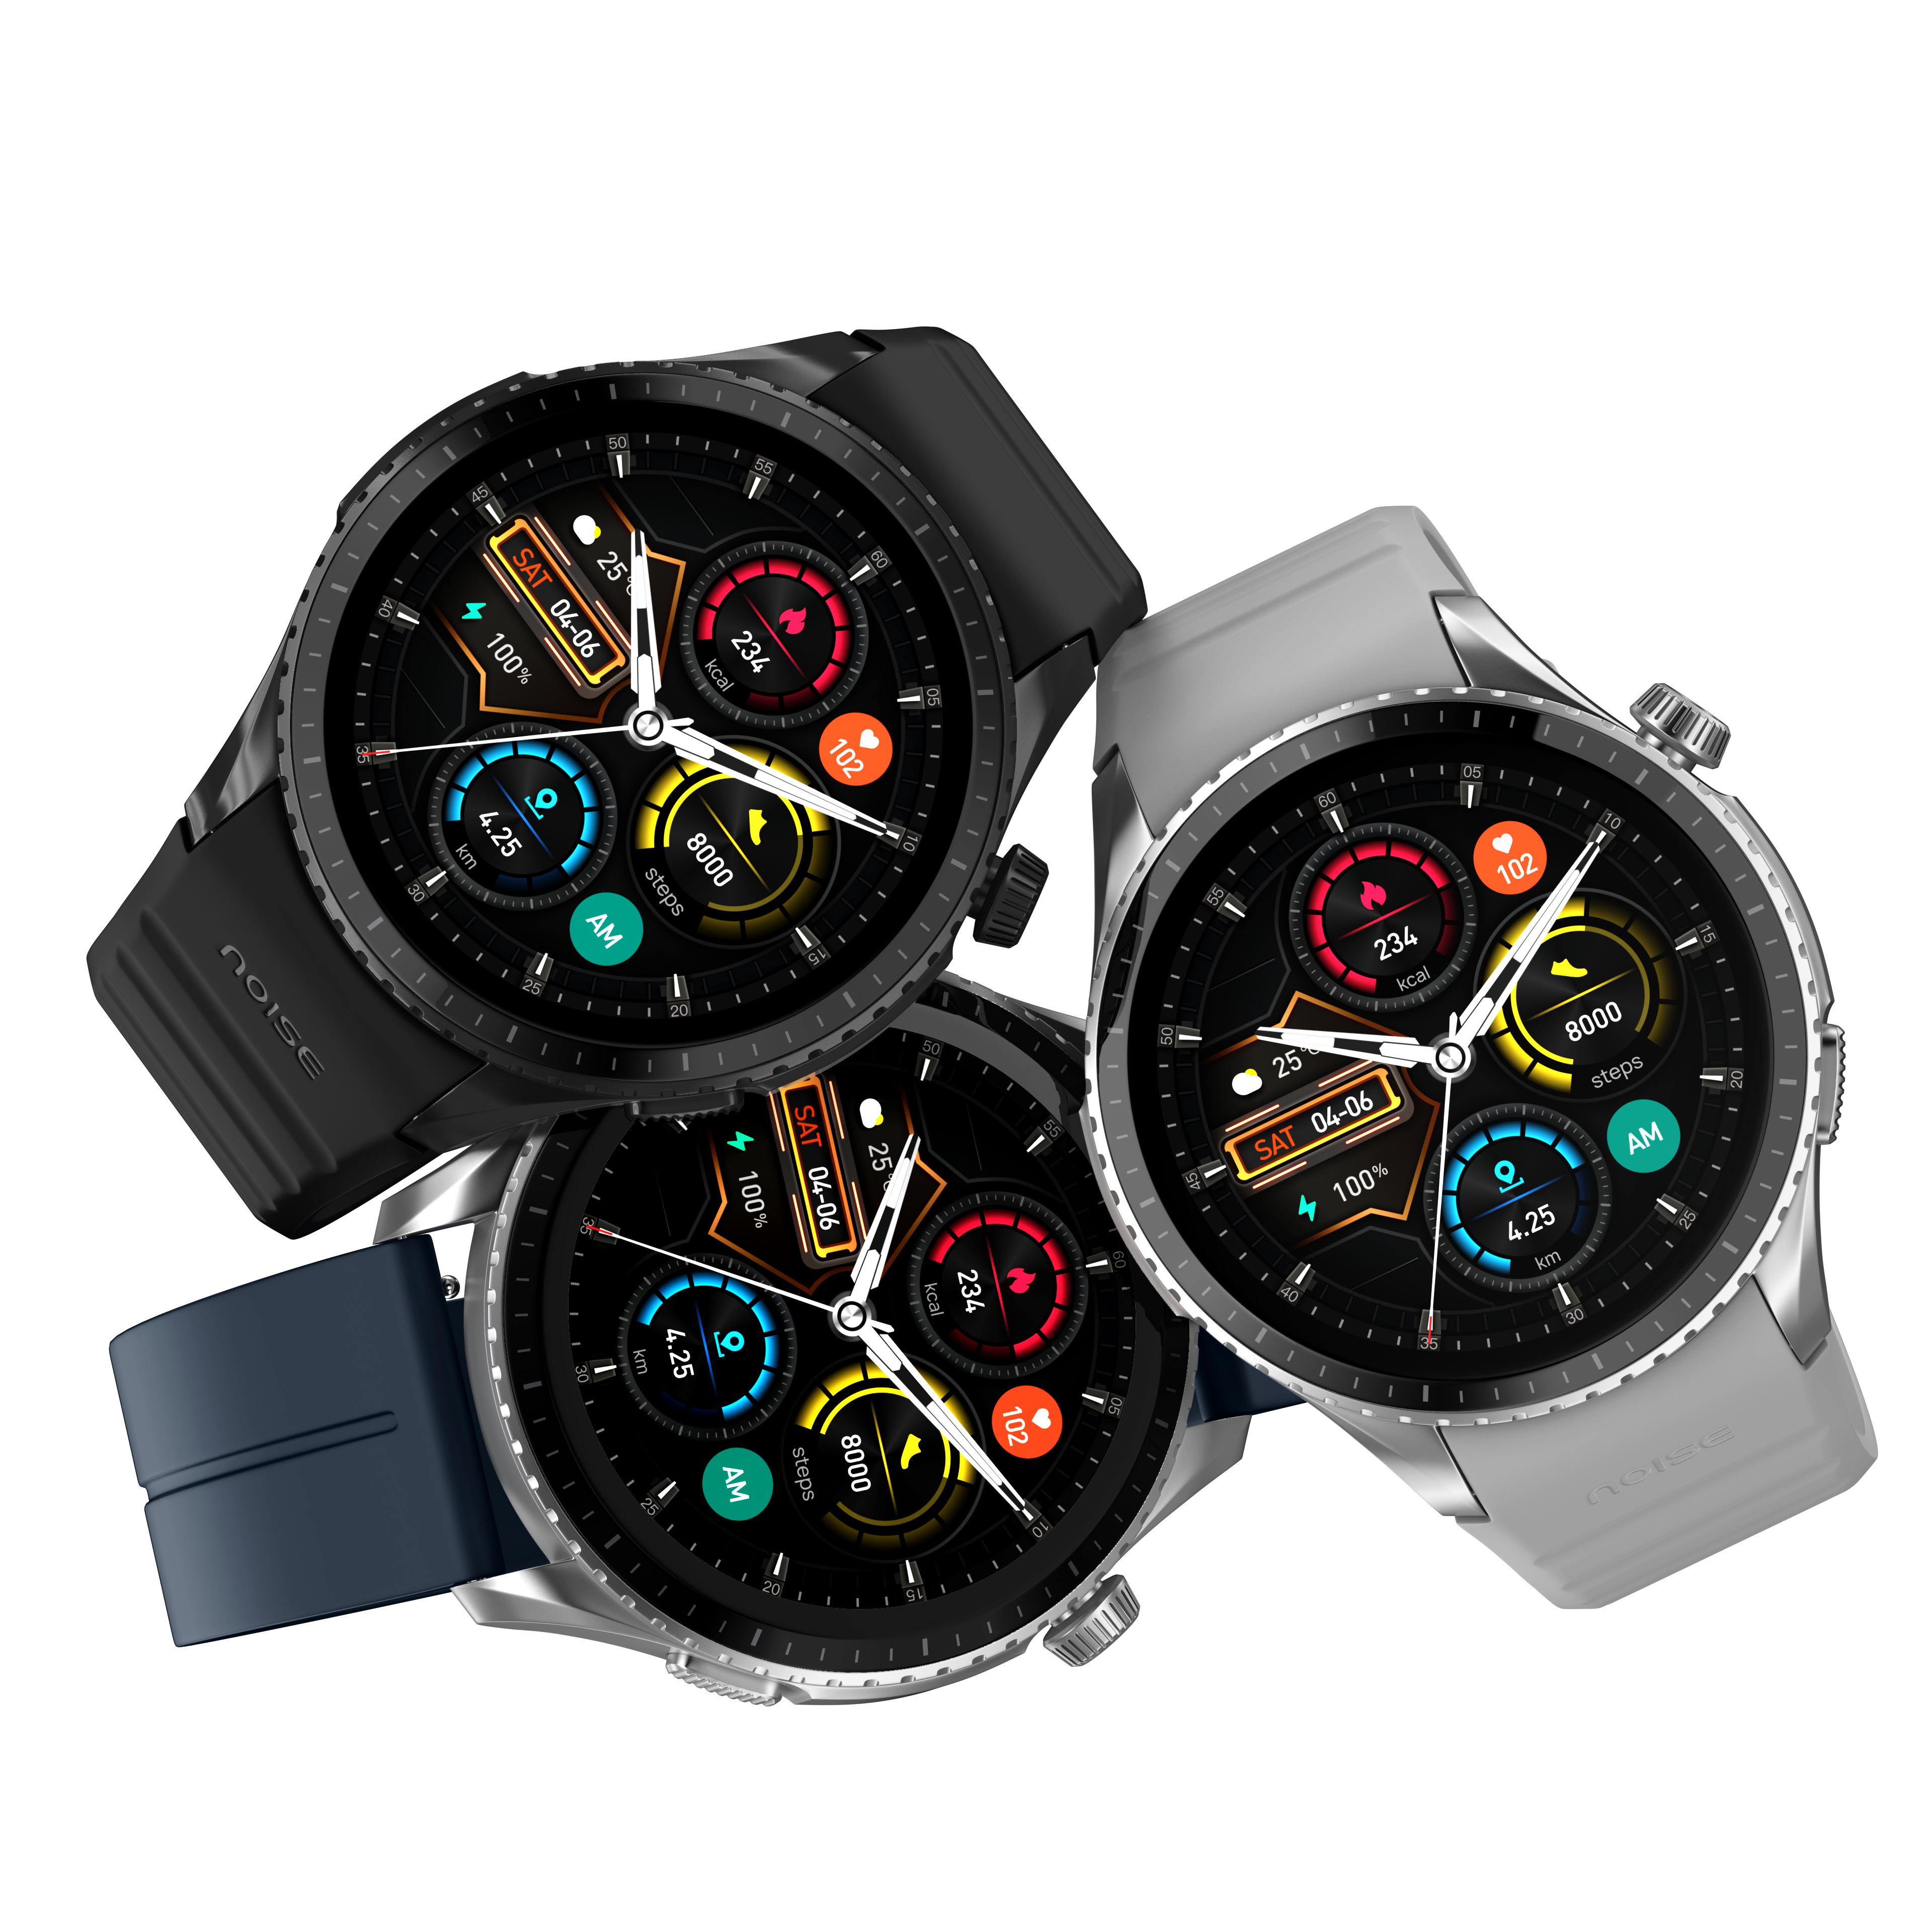 NoiseFit Origin Flagship Smartwatch Launched with Advanced Features